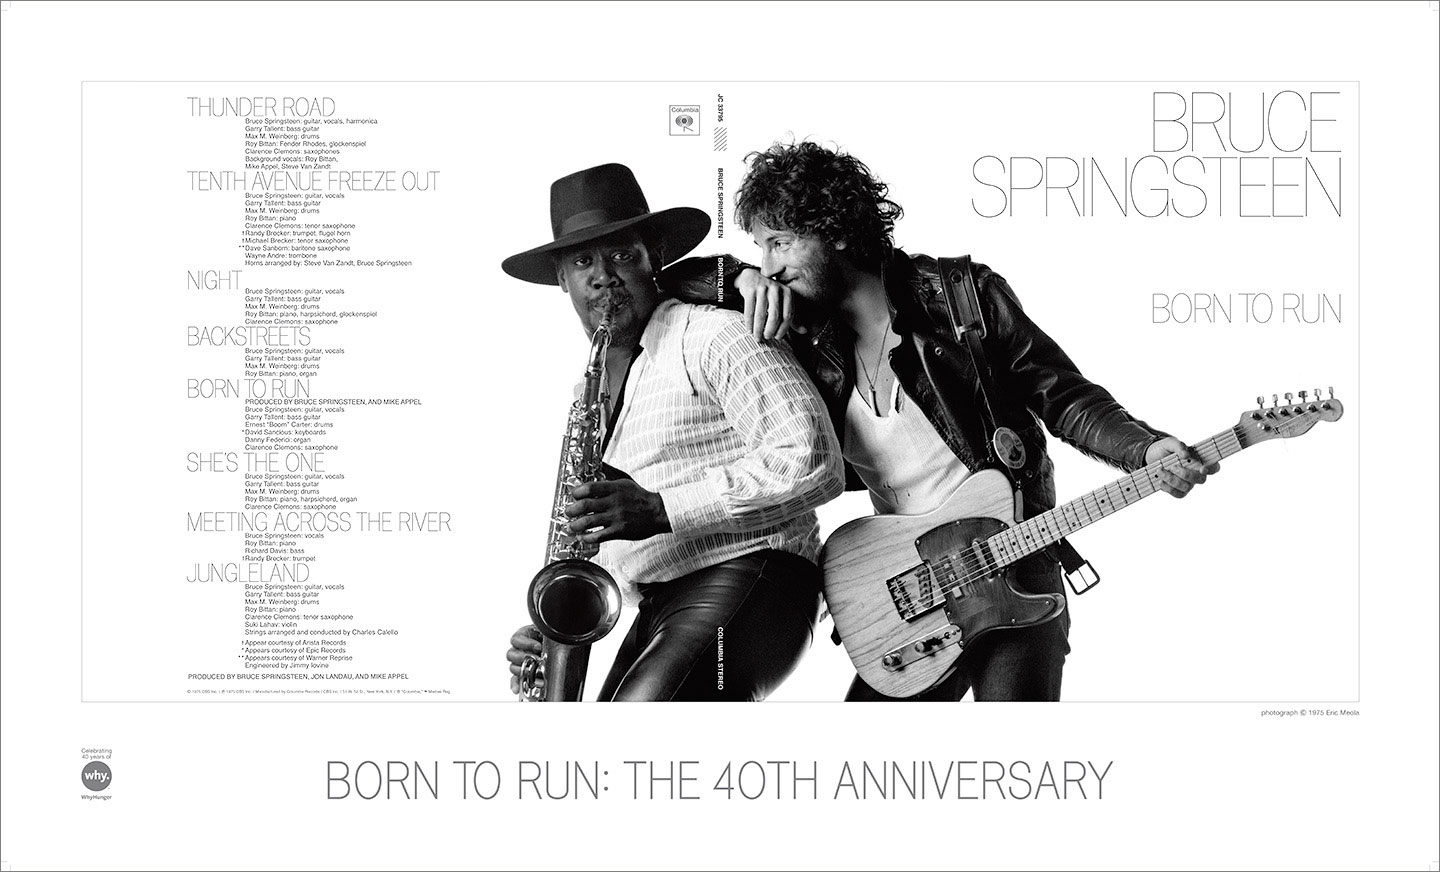 Bruce Springsteen – Born to Run (album and 40th anniversary poster